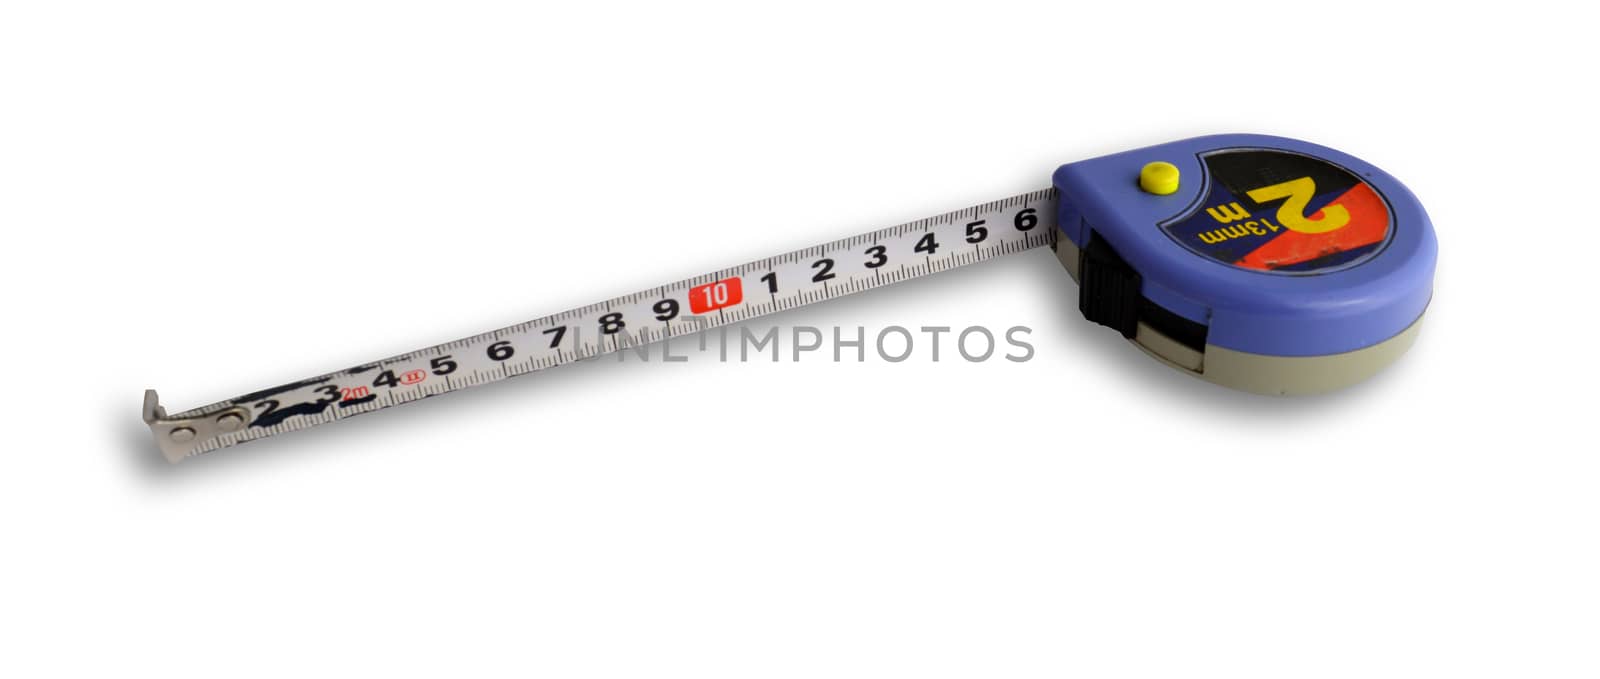 Measure Tape isolated on white background